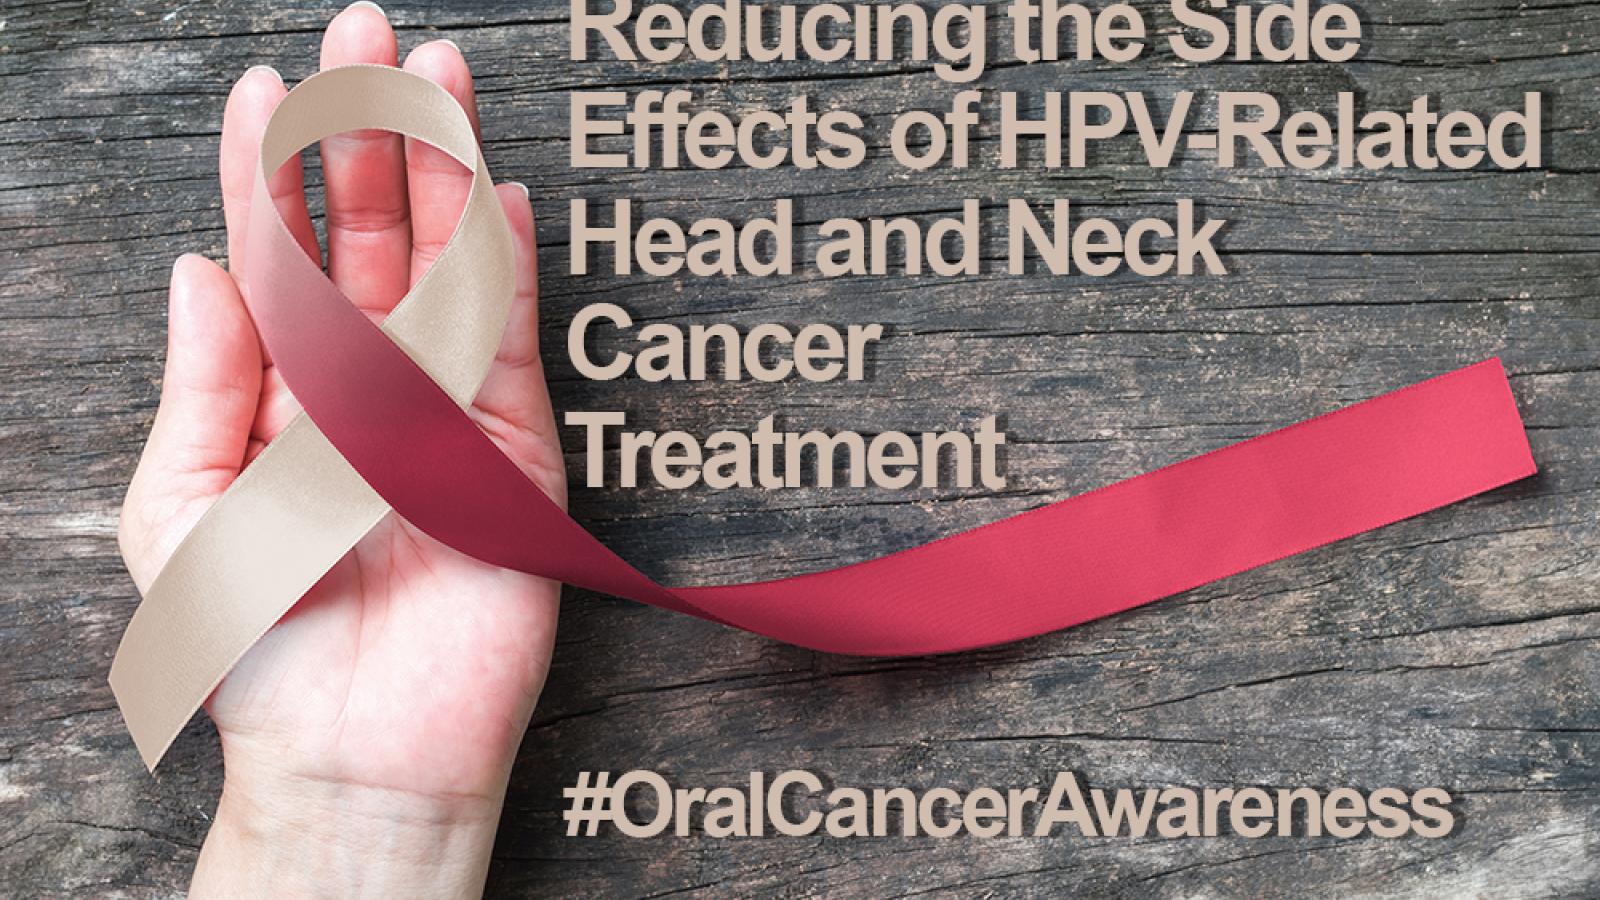 Reducing the Side Effects of HPV-Related Head and Neck Cancer Treatment